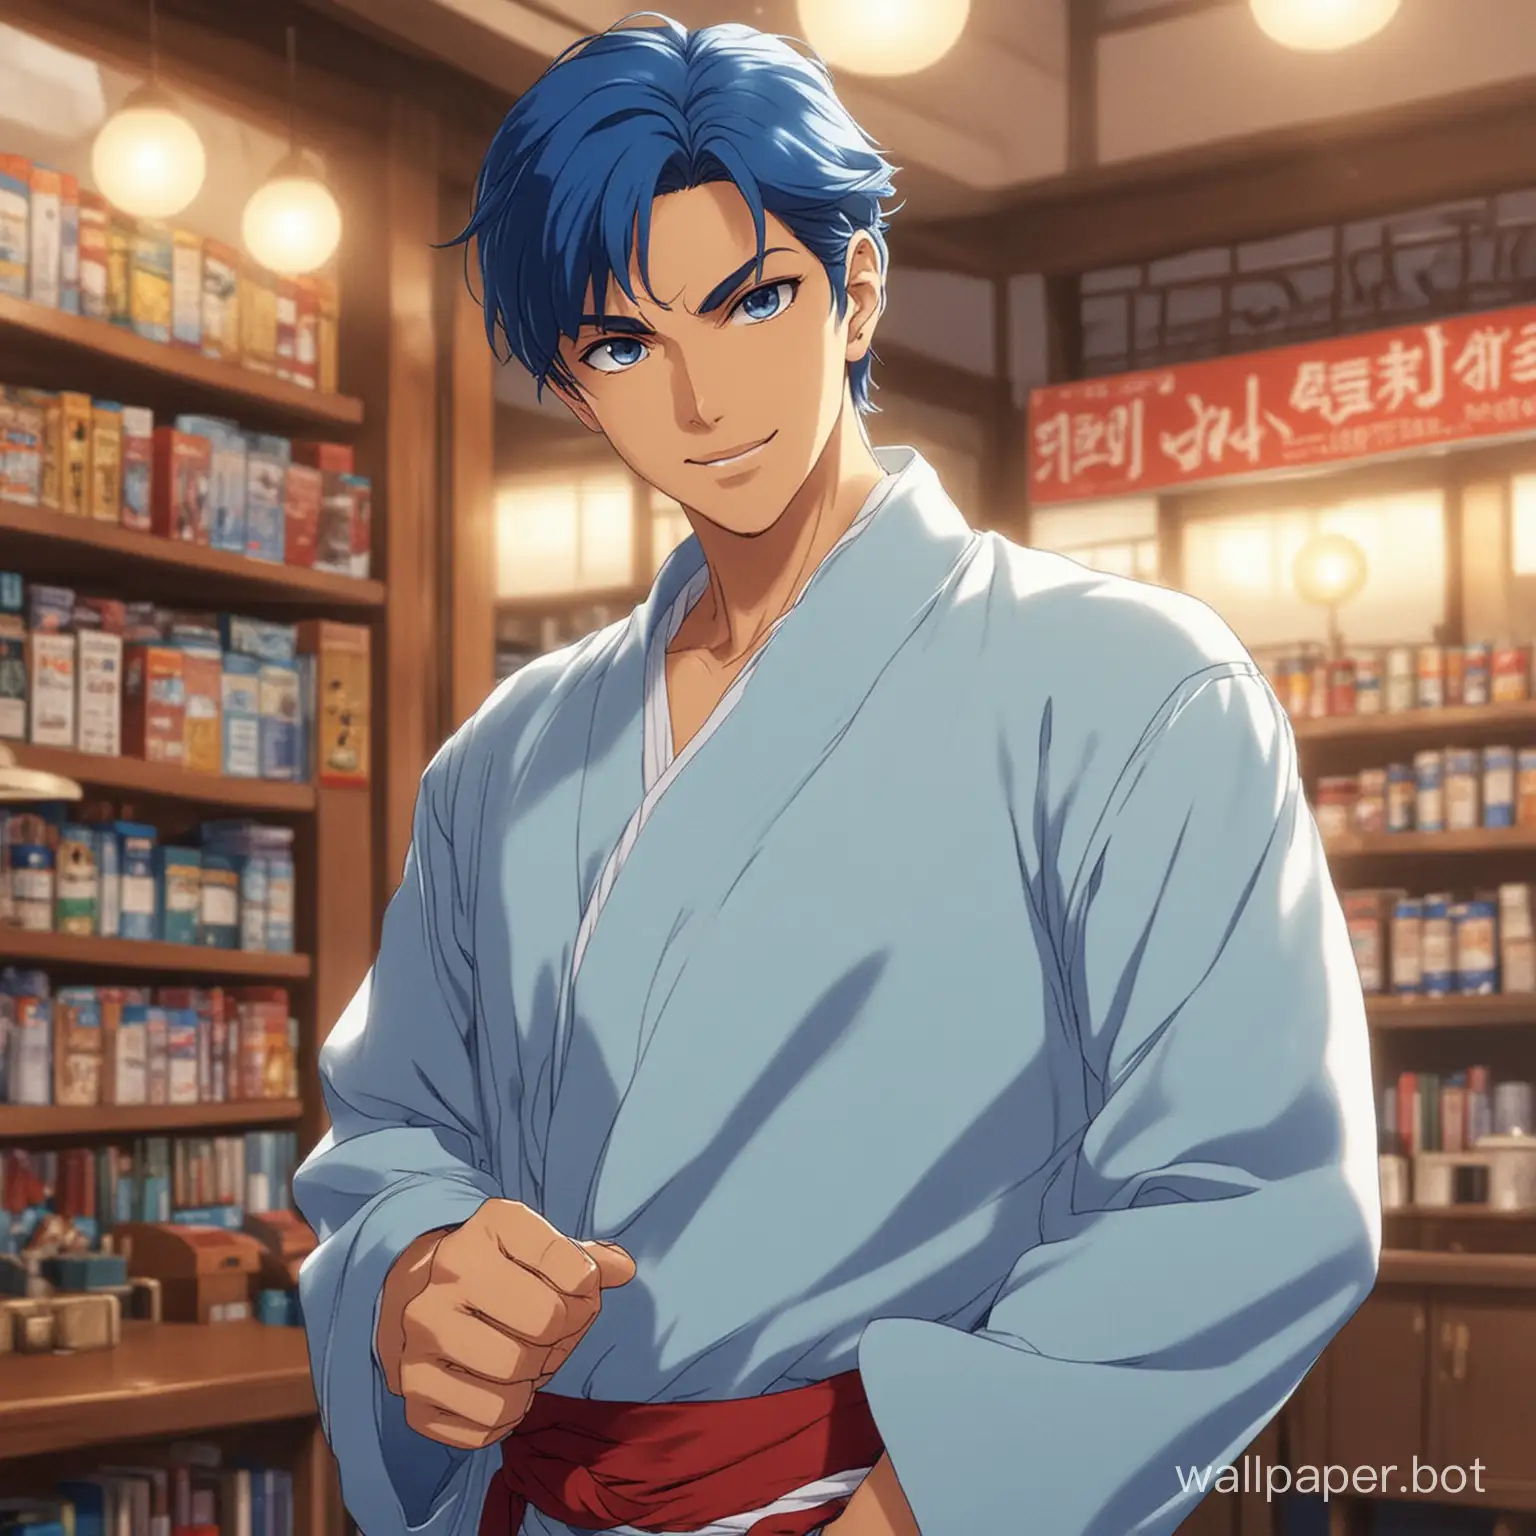 genie who does side hustles as a male anime version